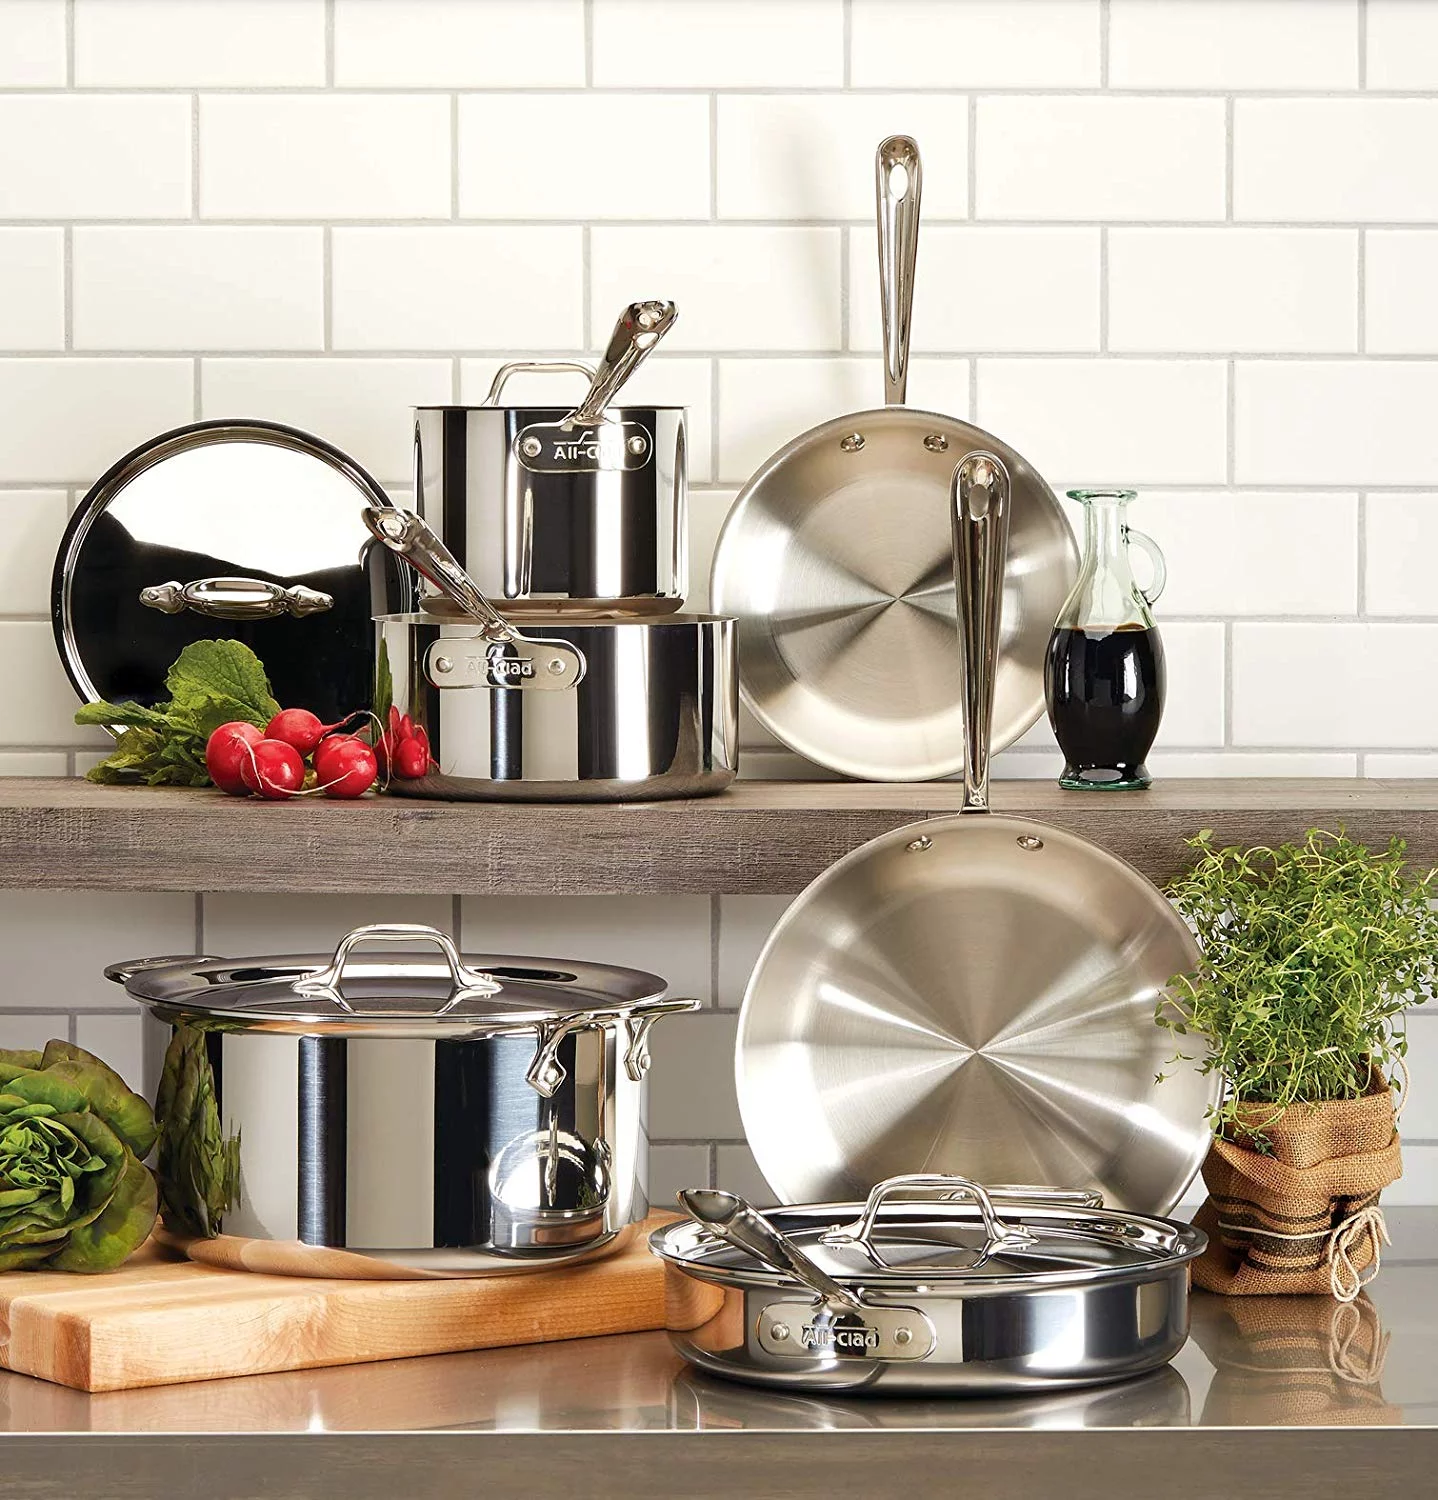 Find Your Perfect Kitchenware Essentials at This Top Online Shop